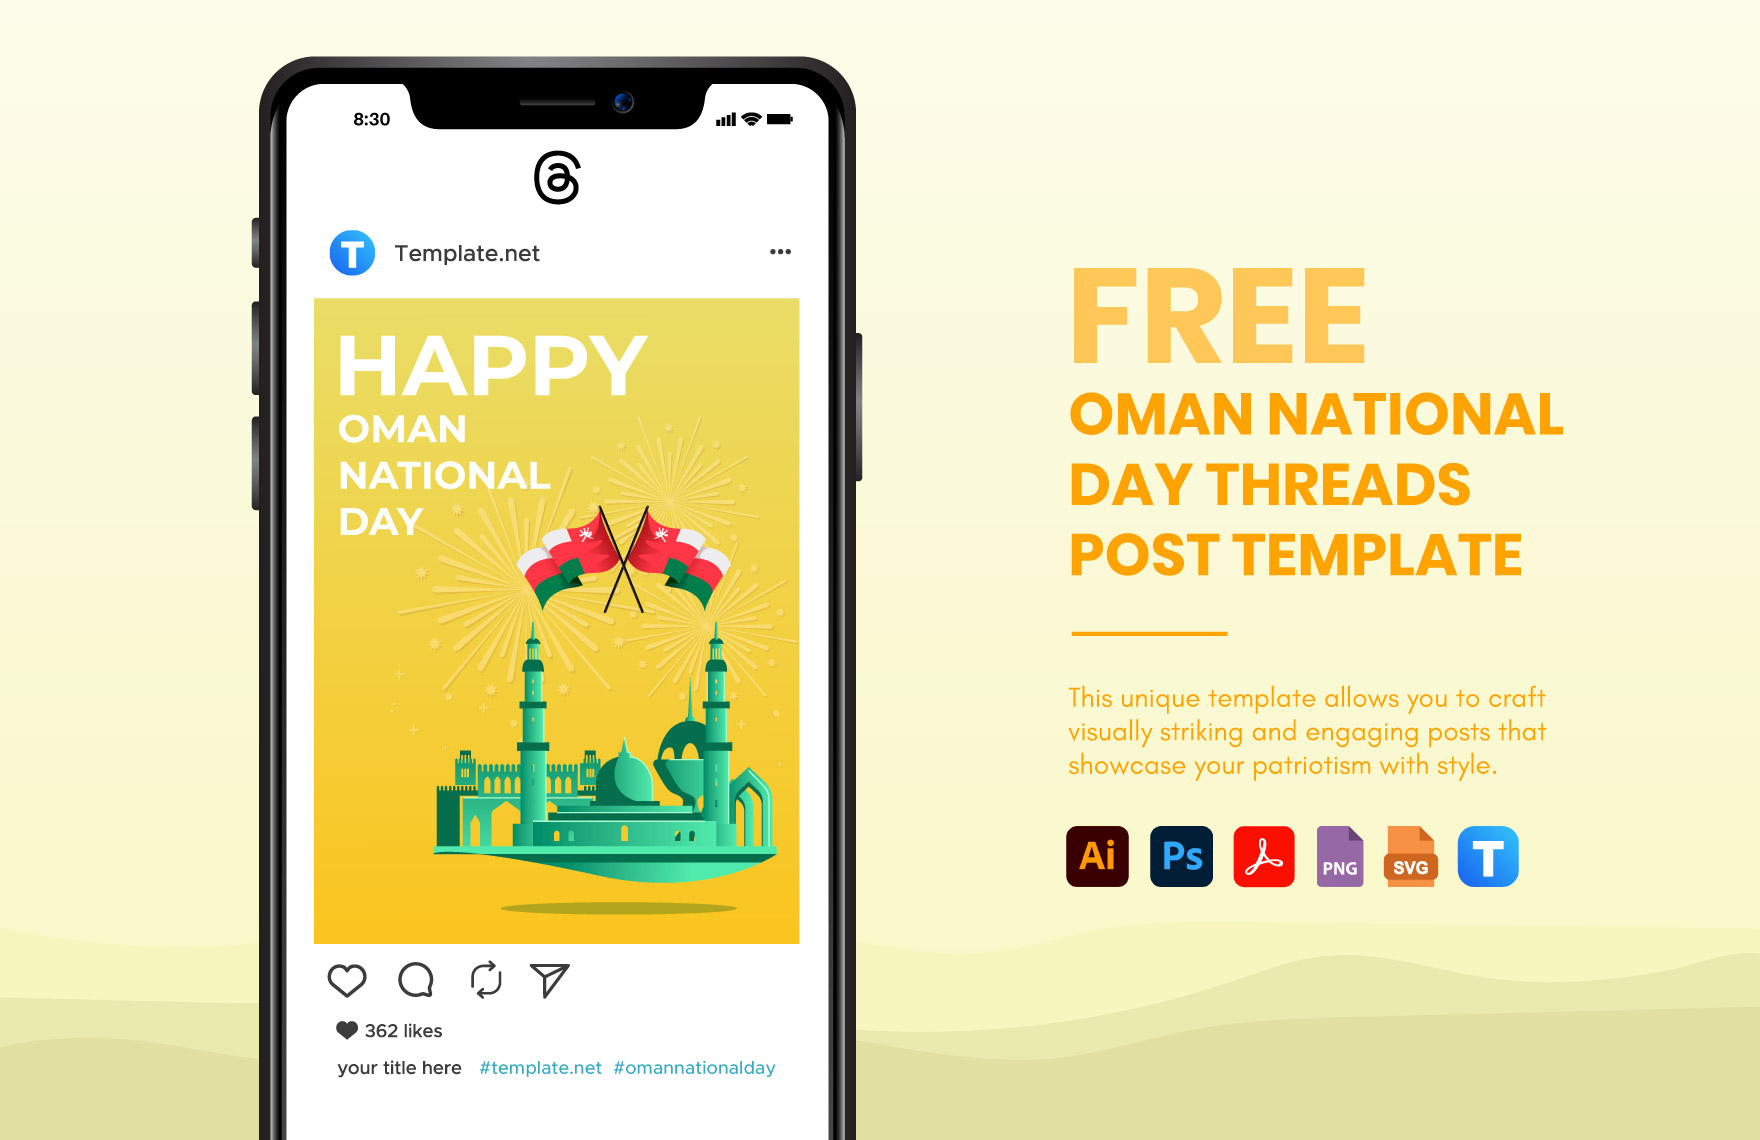 Free Oman National Day Threads Post Template in PDF, Illustrator, PSD, SVG, PNG